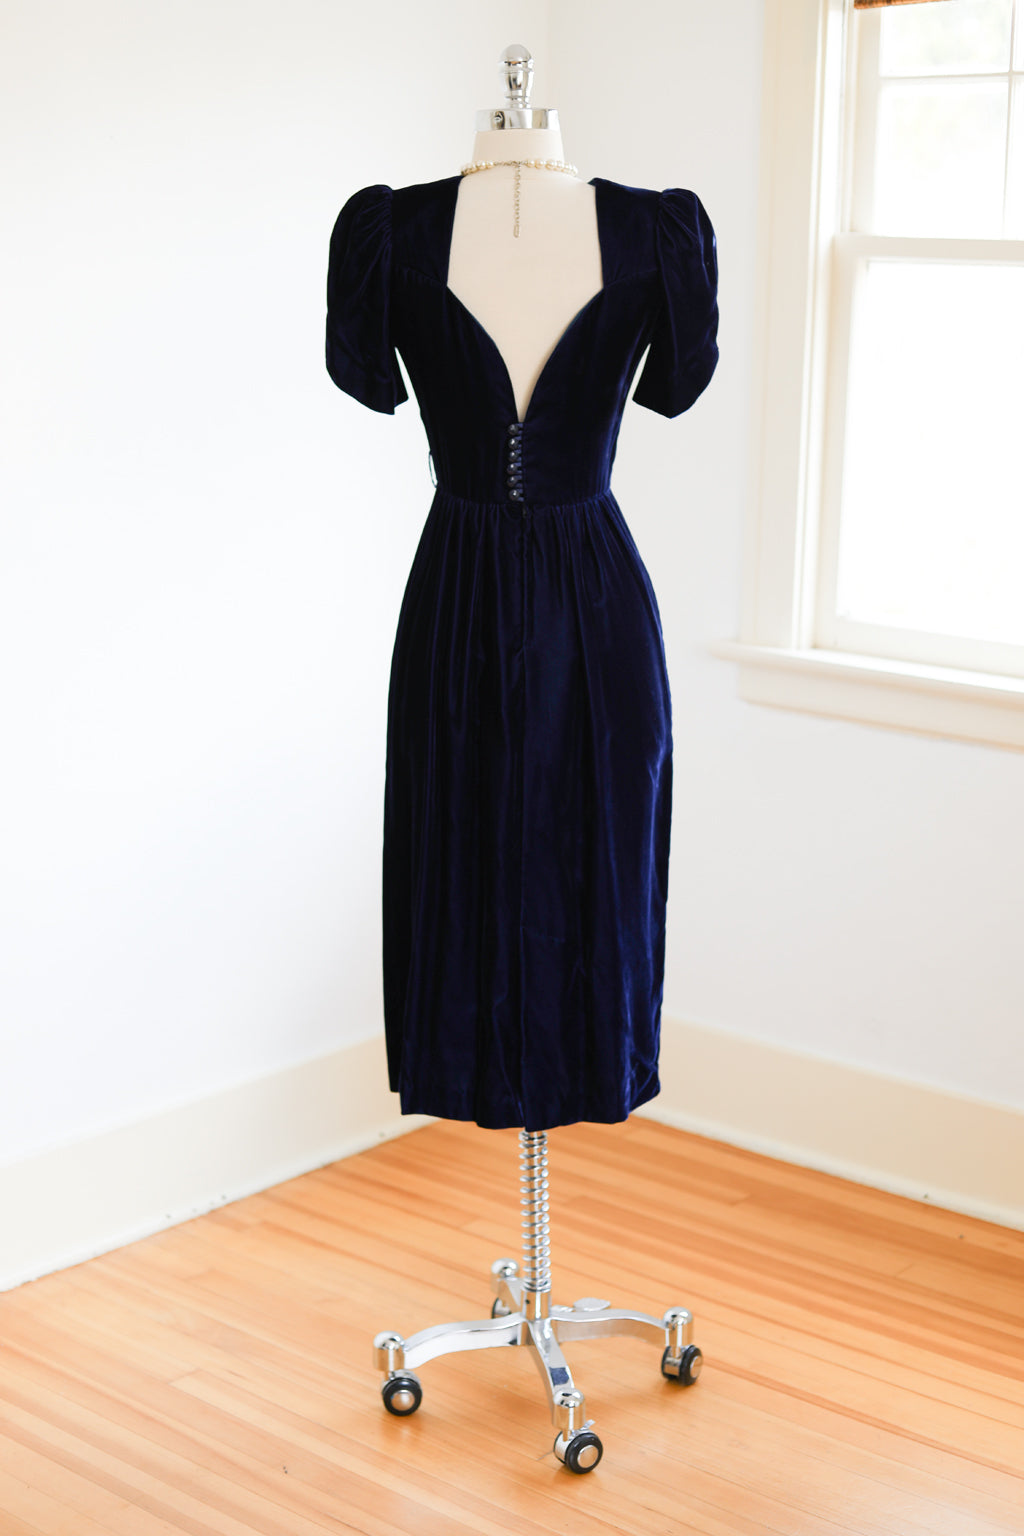 Vintage 1980s Lanz Dress - Rich Cobalt Blue Velvet 1930s Inspired w Puff Sleeves + Sinfully Cut Rear Bodice Size XS - S